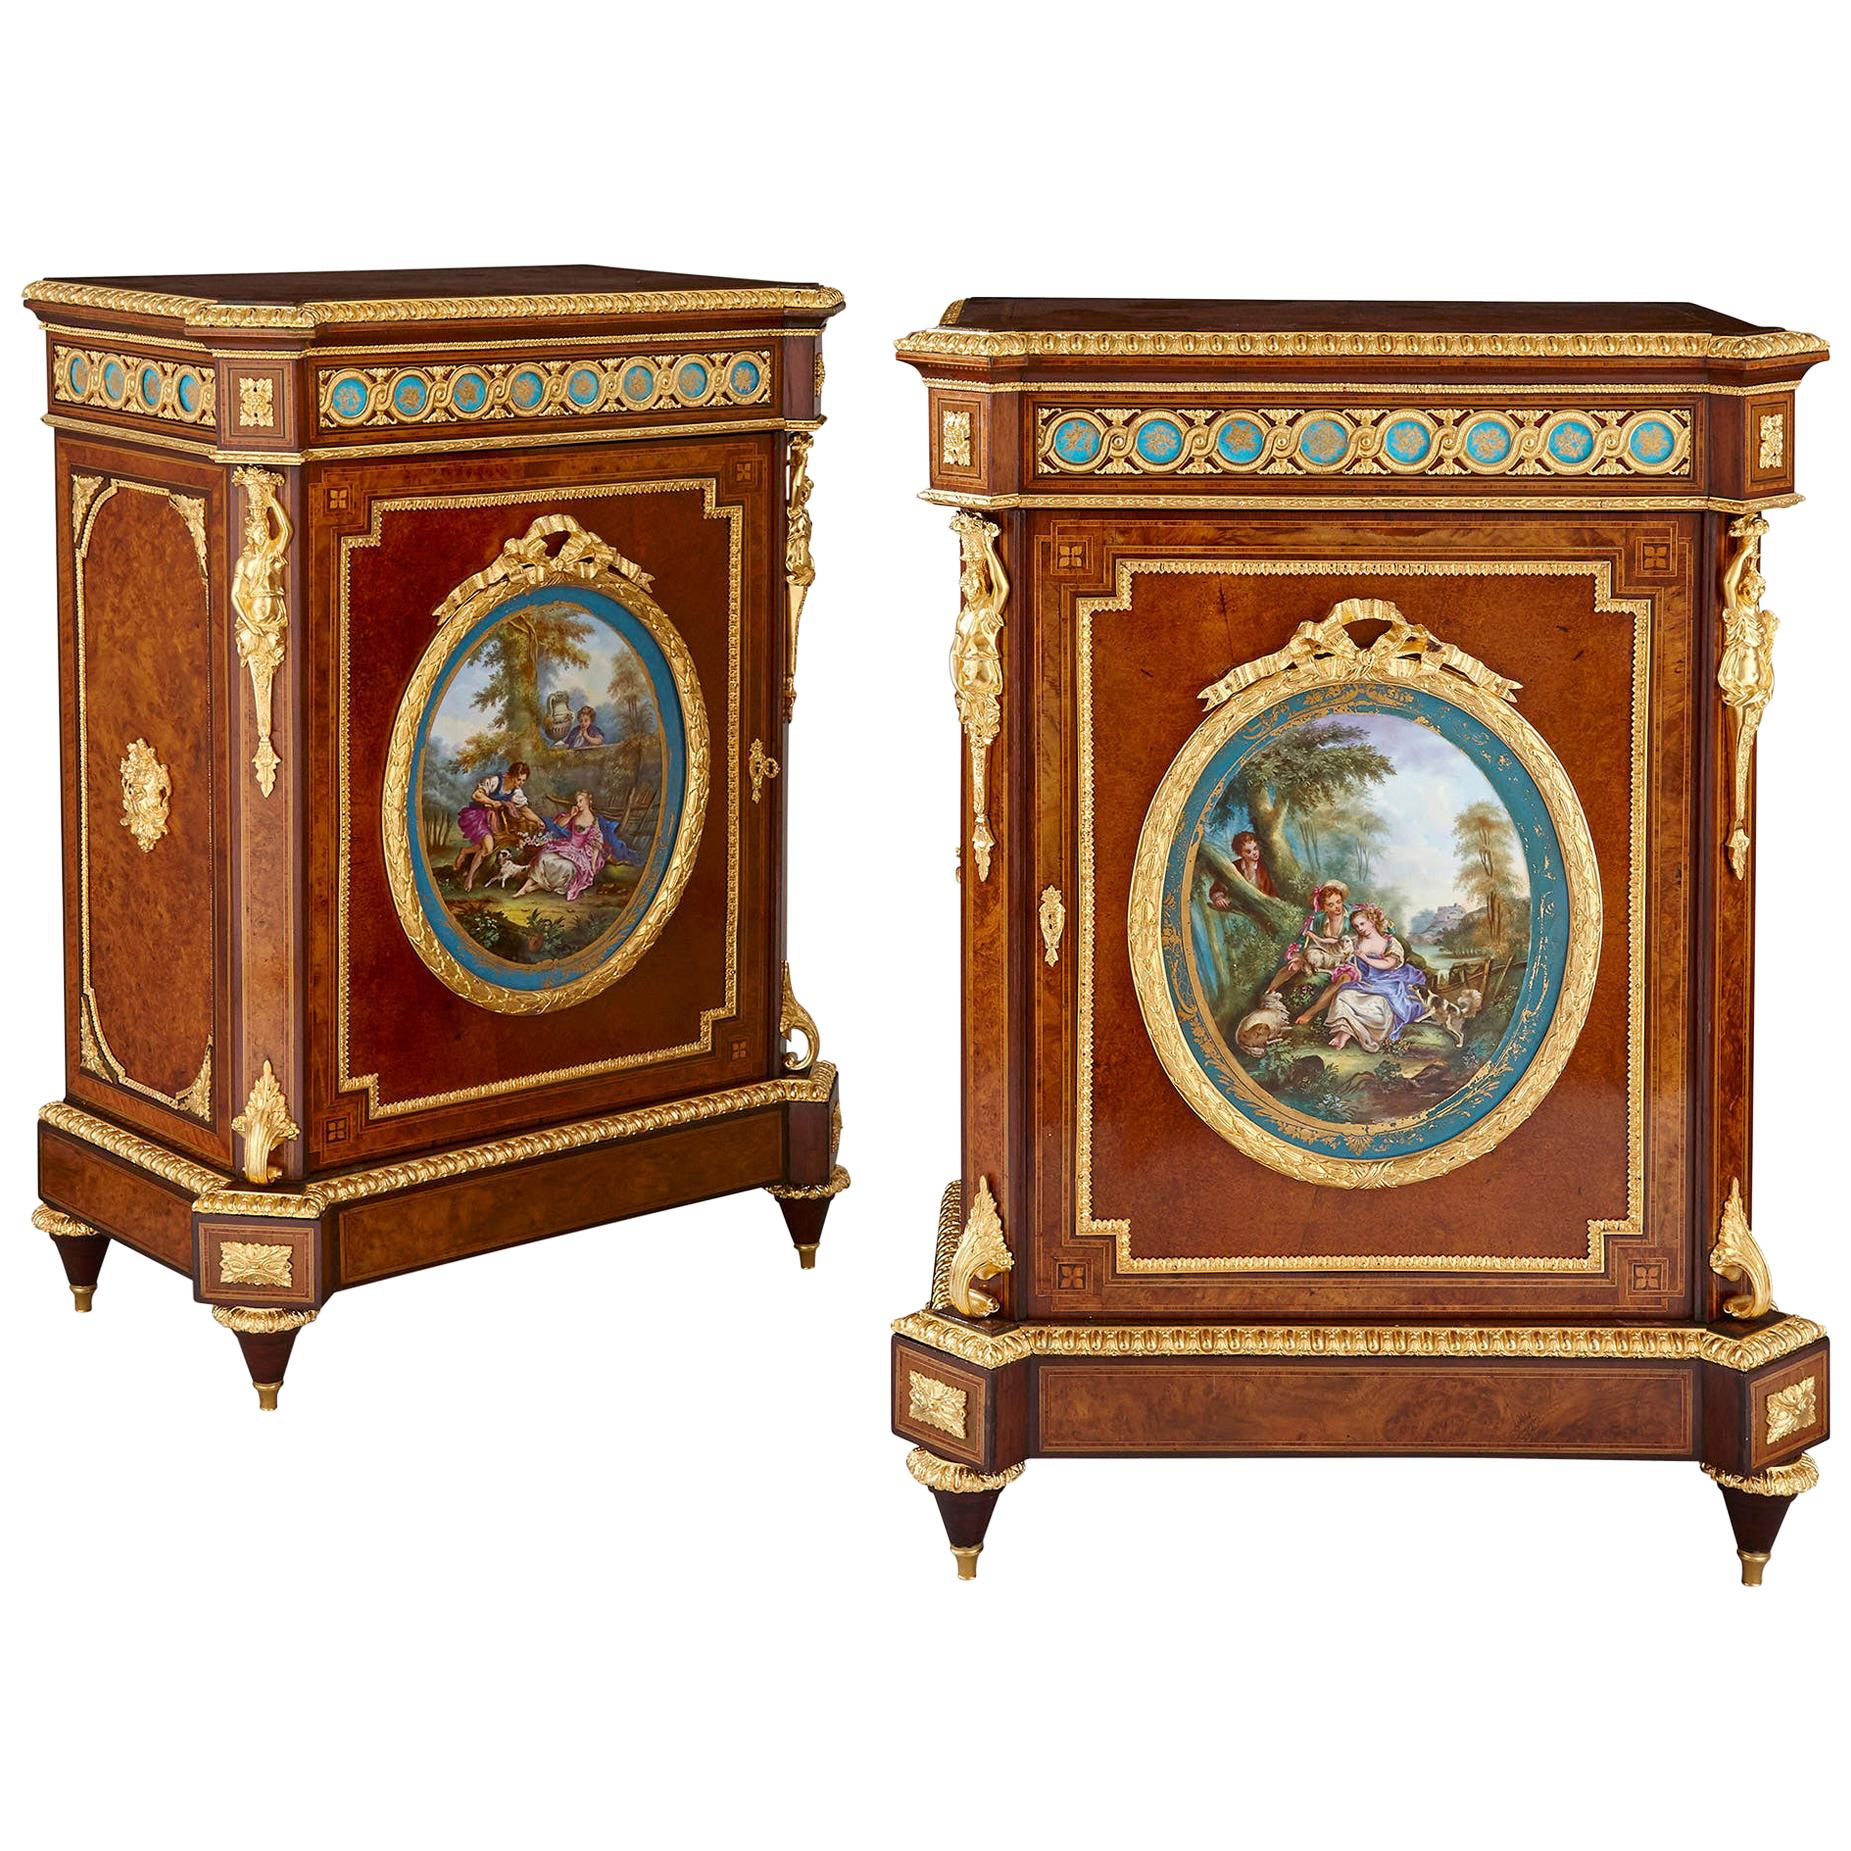 Pair of Victorian Period Amboyna Cabinets with Sèvres Style Porcelain Plaques